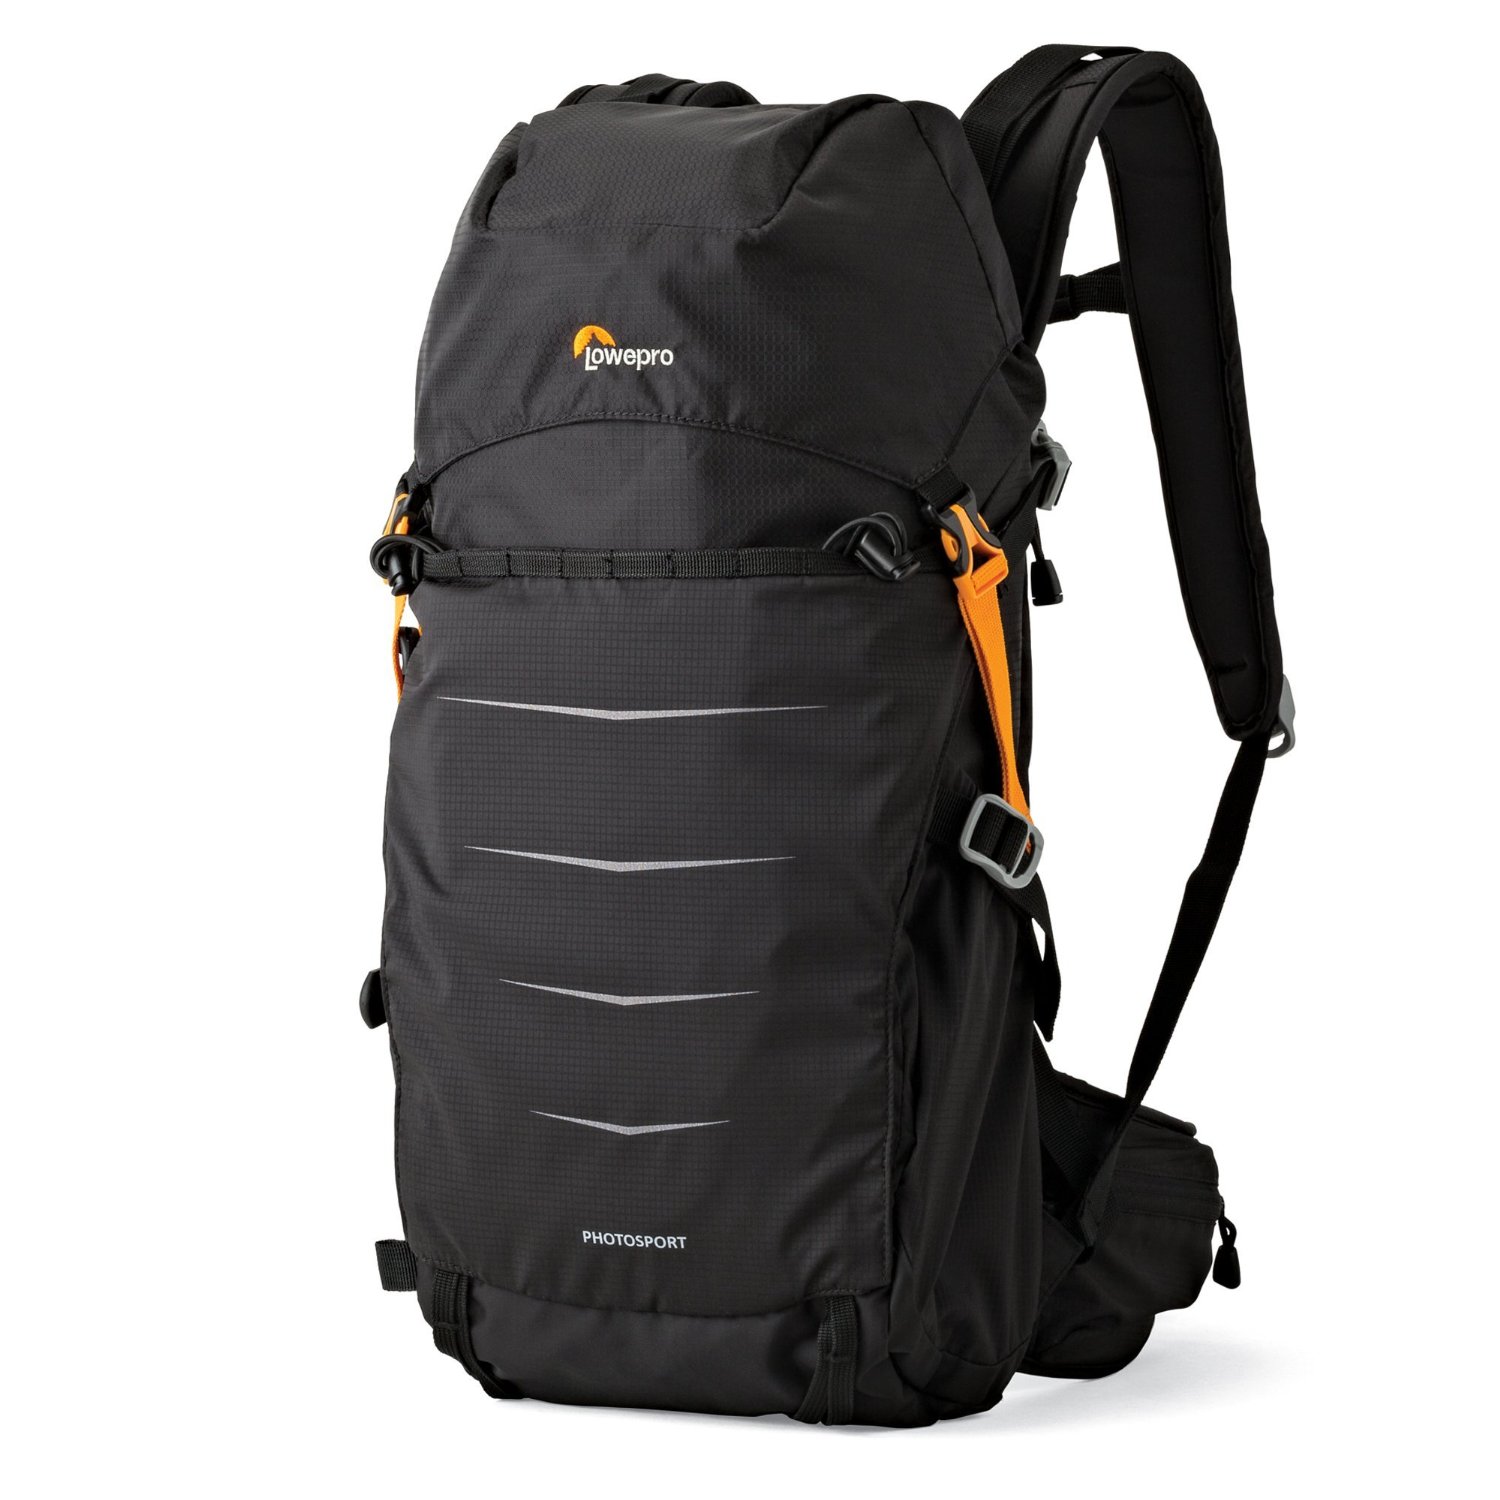 10 Best Hiking Camera Backpacks: Your Buyer’s Guide (2019) | www.bagssaleusa.com